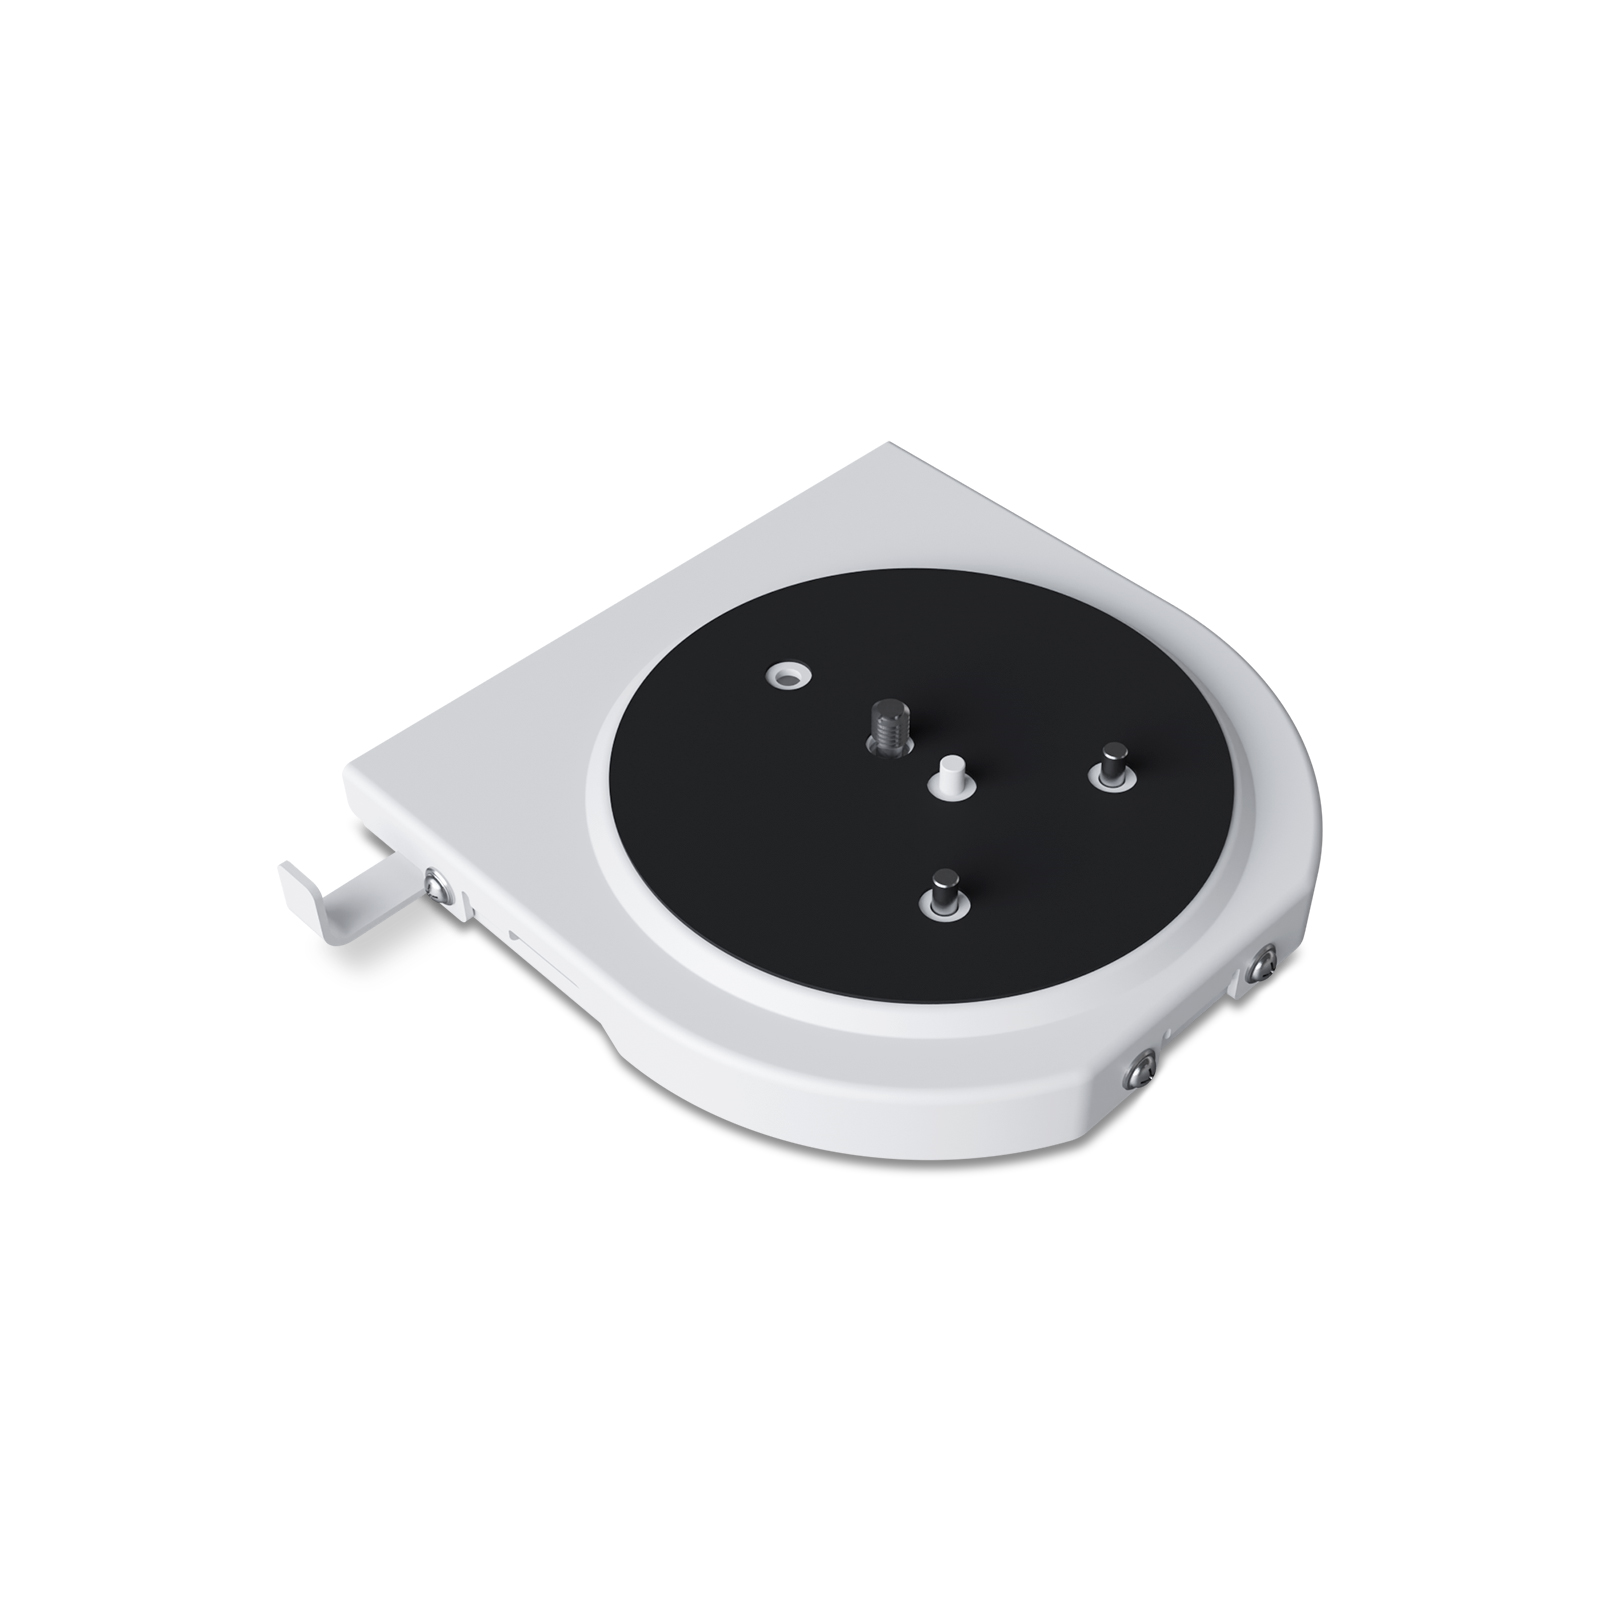 BD-X1-CM-W Ceiling Mount for X1 and X1 Ultra White